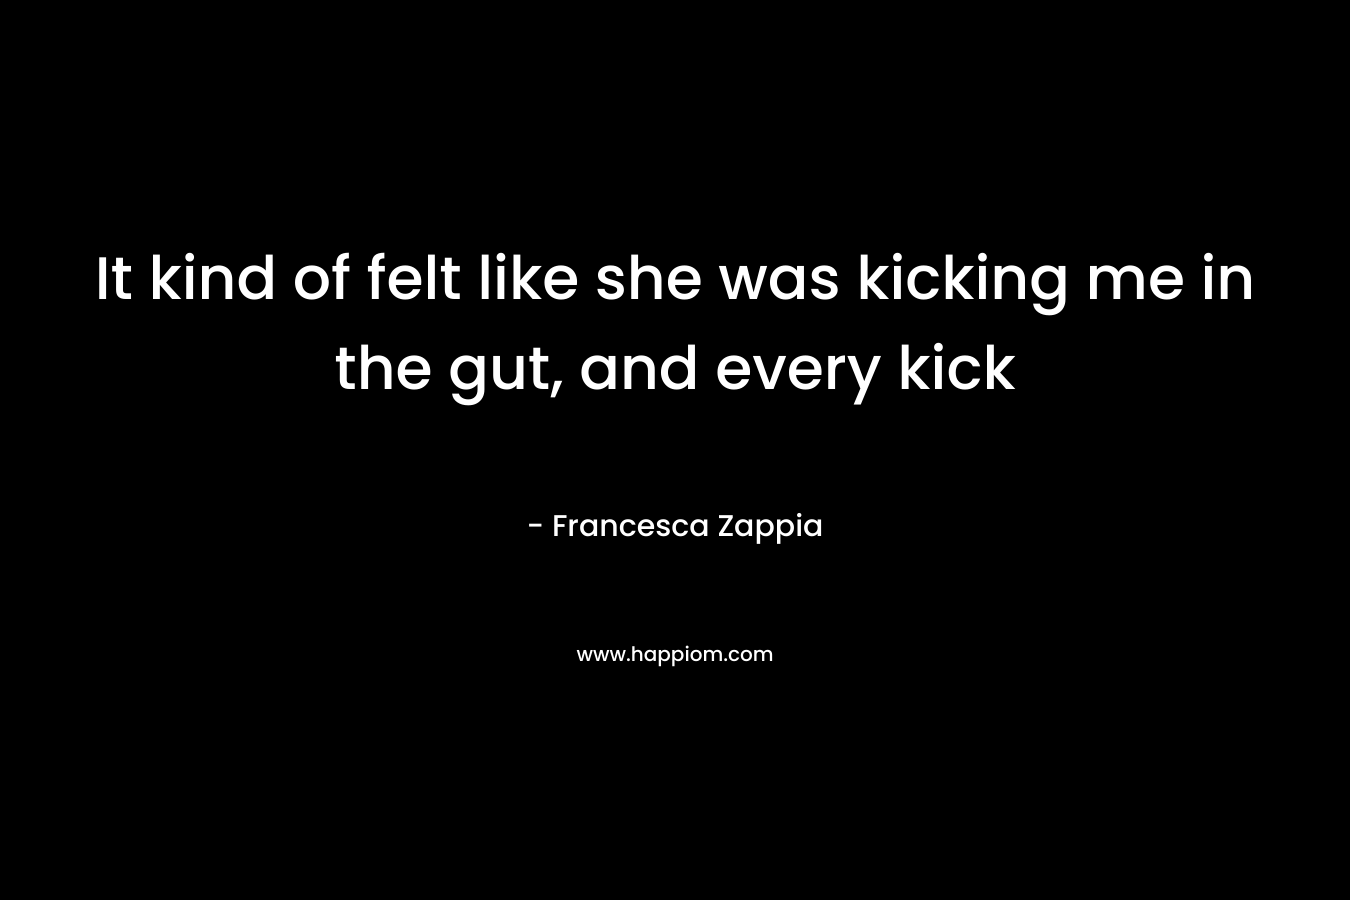 It kind of felt like she was kicking me in the gut, and every kick – Francesca Zappia